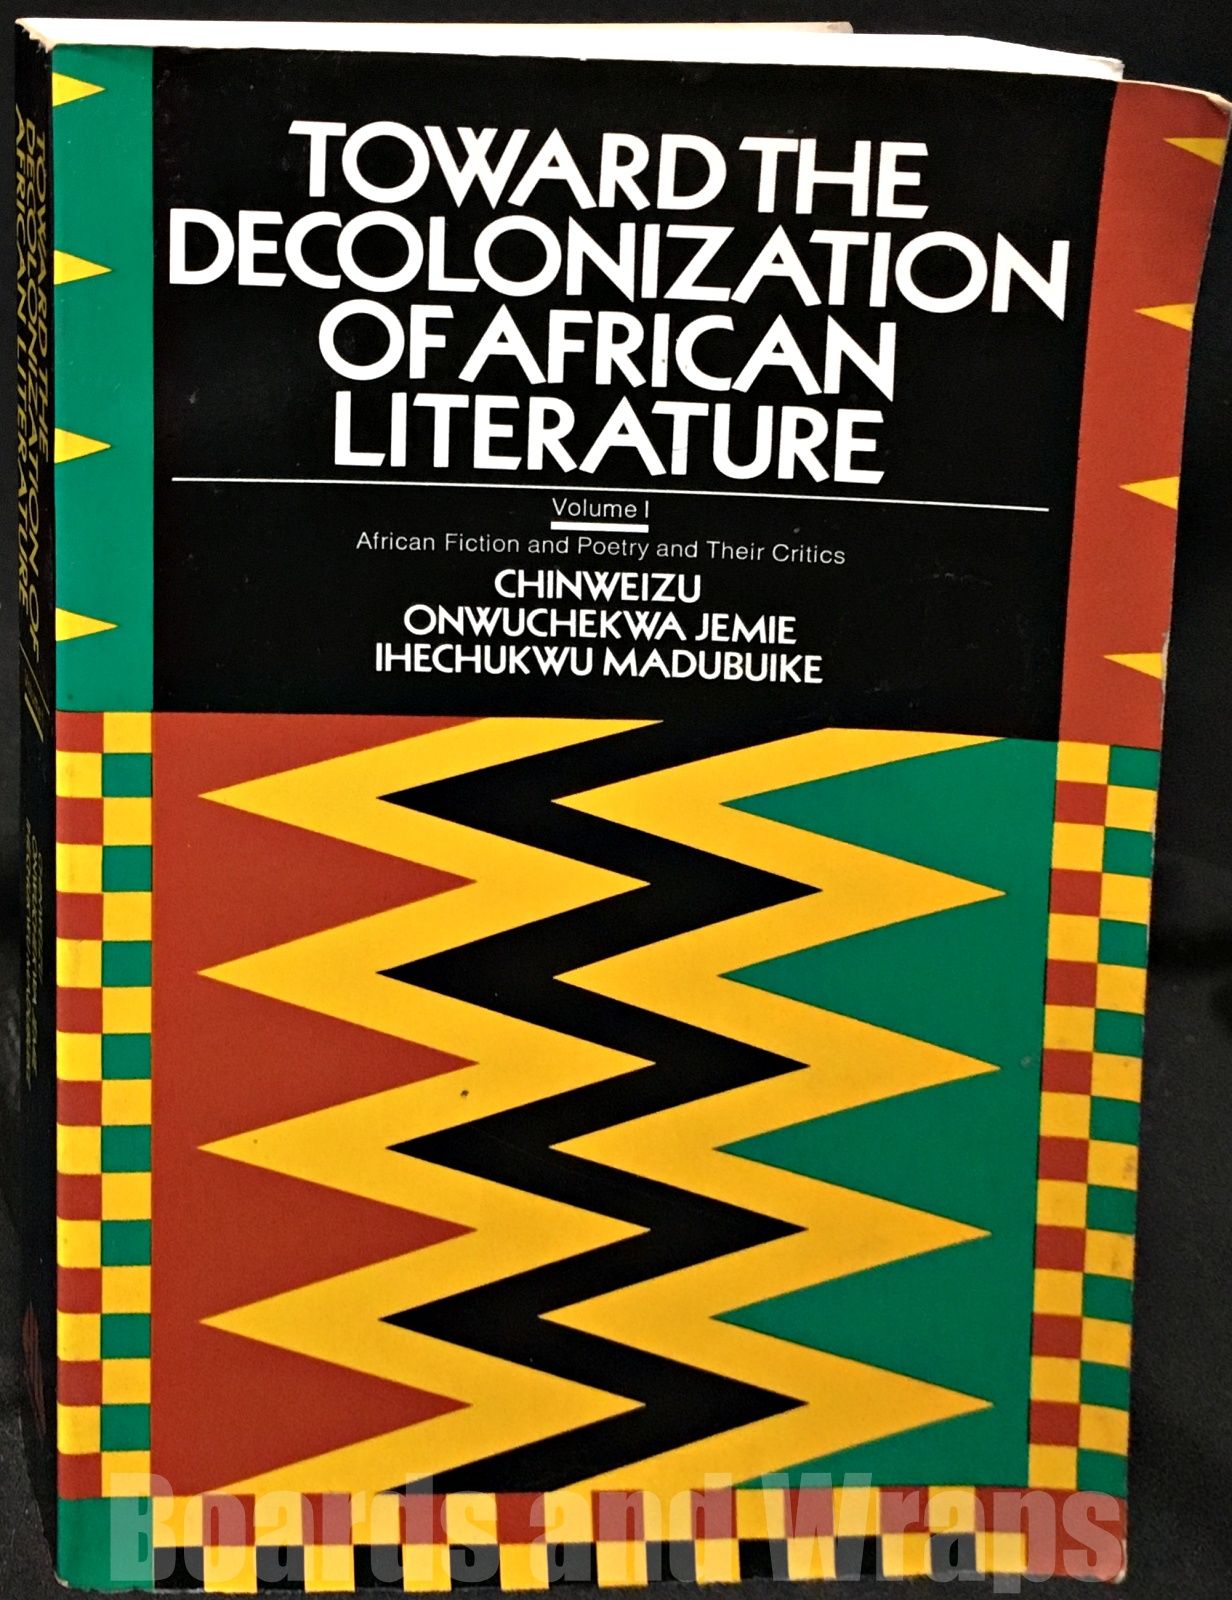 Toward the Decolonization of African Literature Vol. 1: African Fiction and Poetry and Their Critics